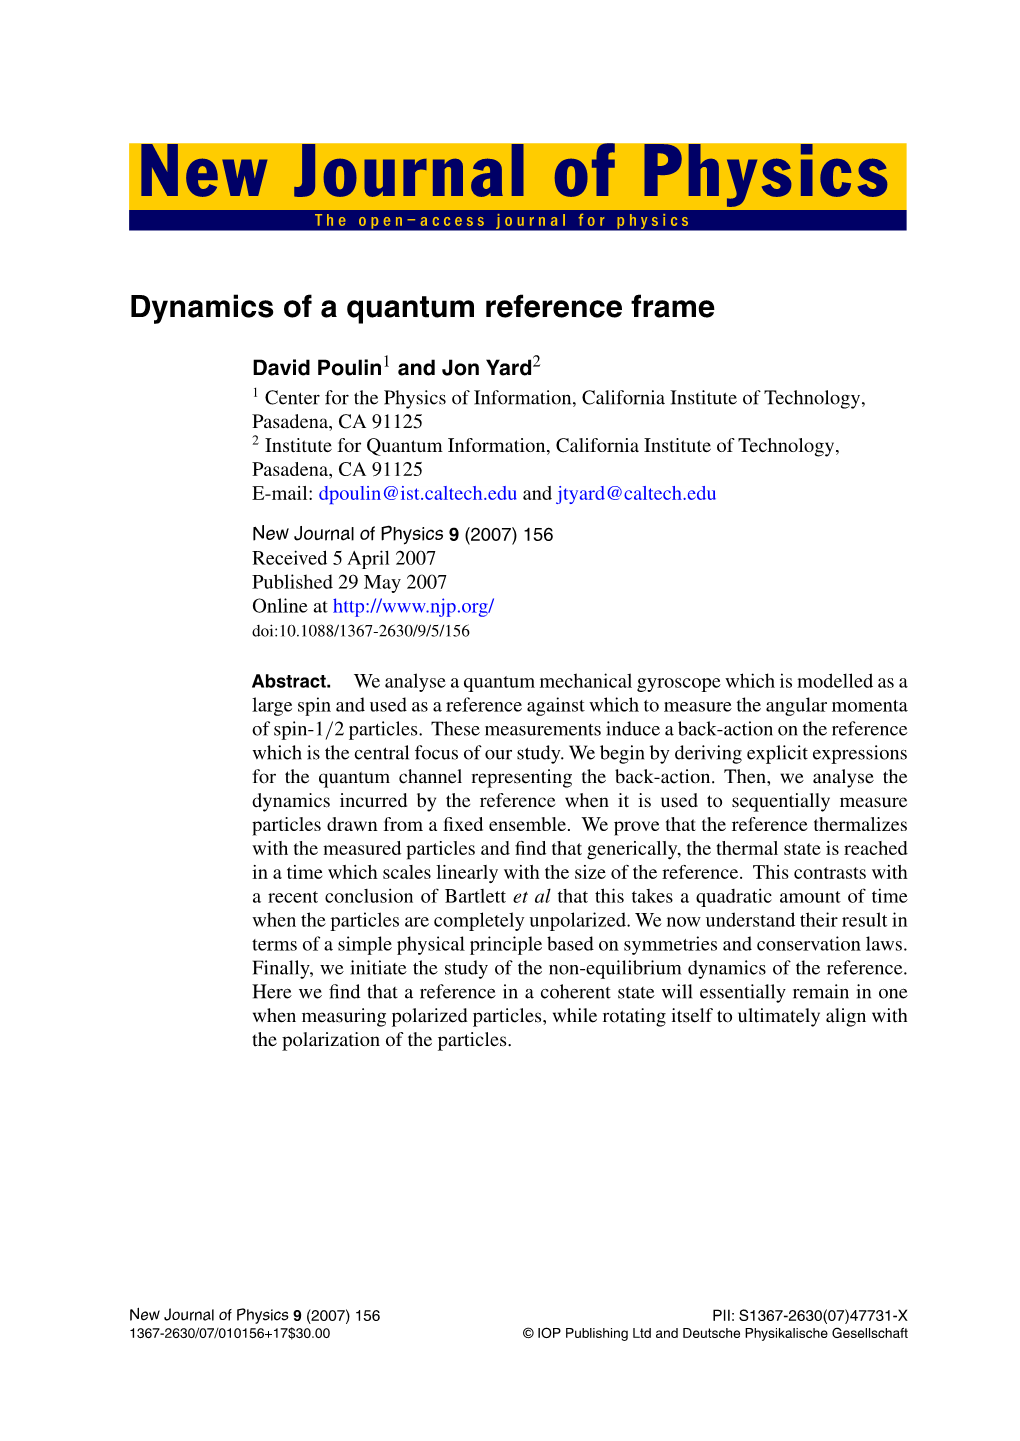 Dynamics of a Quantum Reference Frame